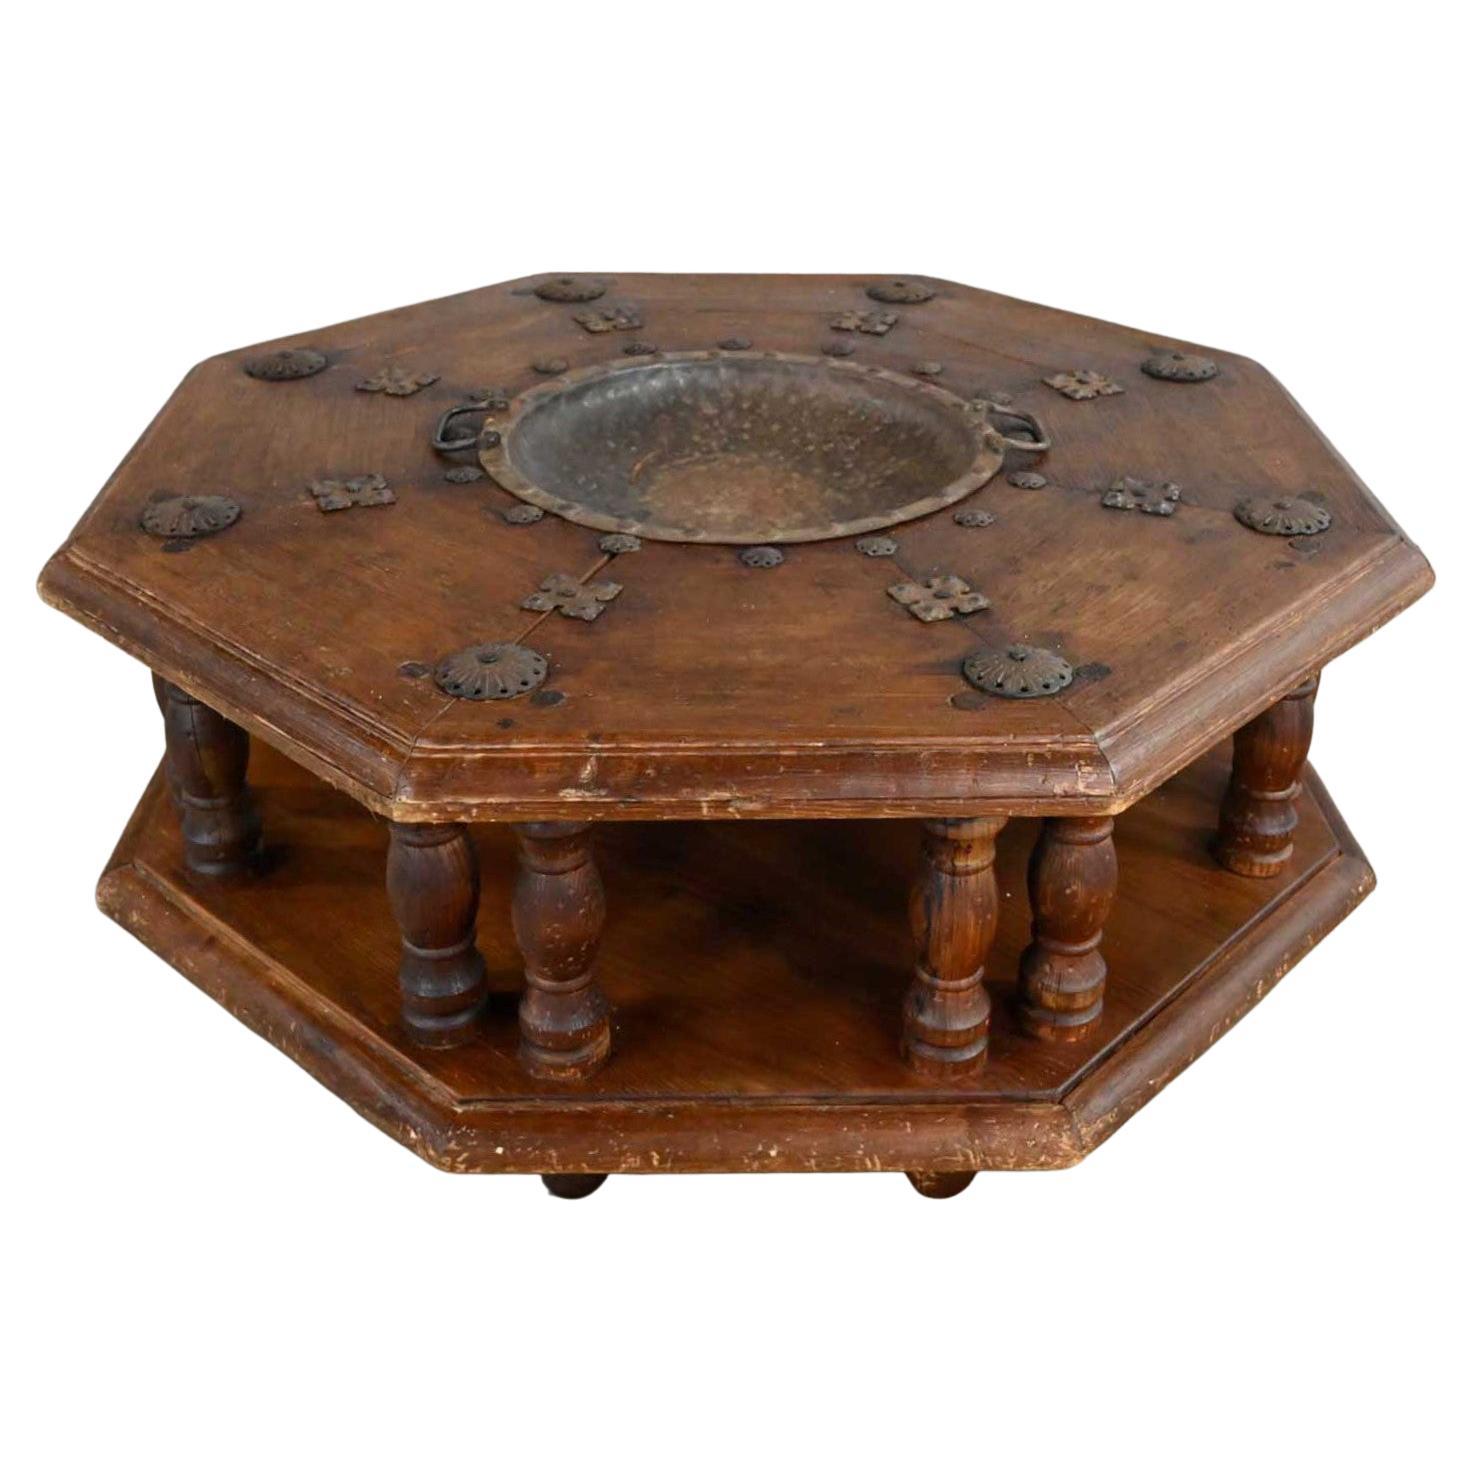 Spanish Colonial Revival Rustic Octagon Brazier Coffee Table Style Artes De Mexi